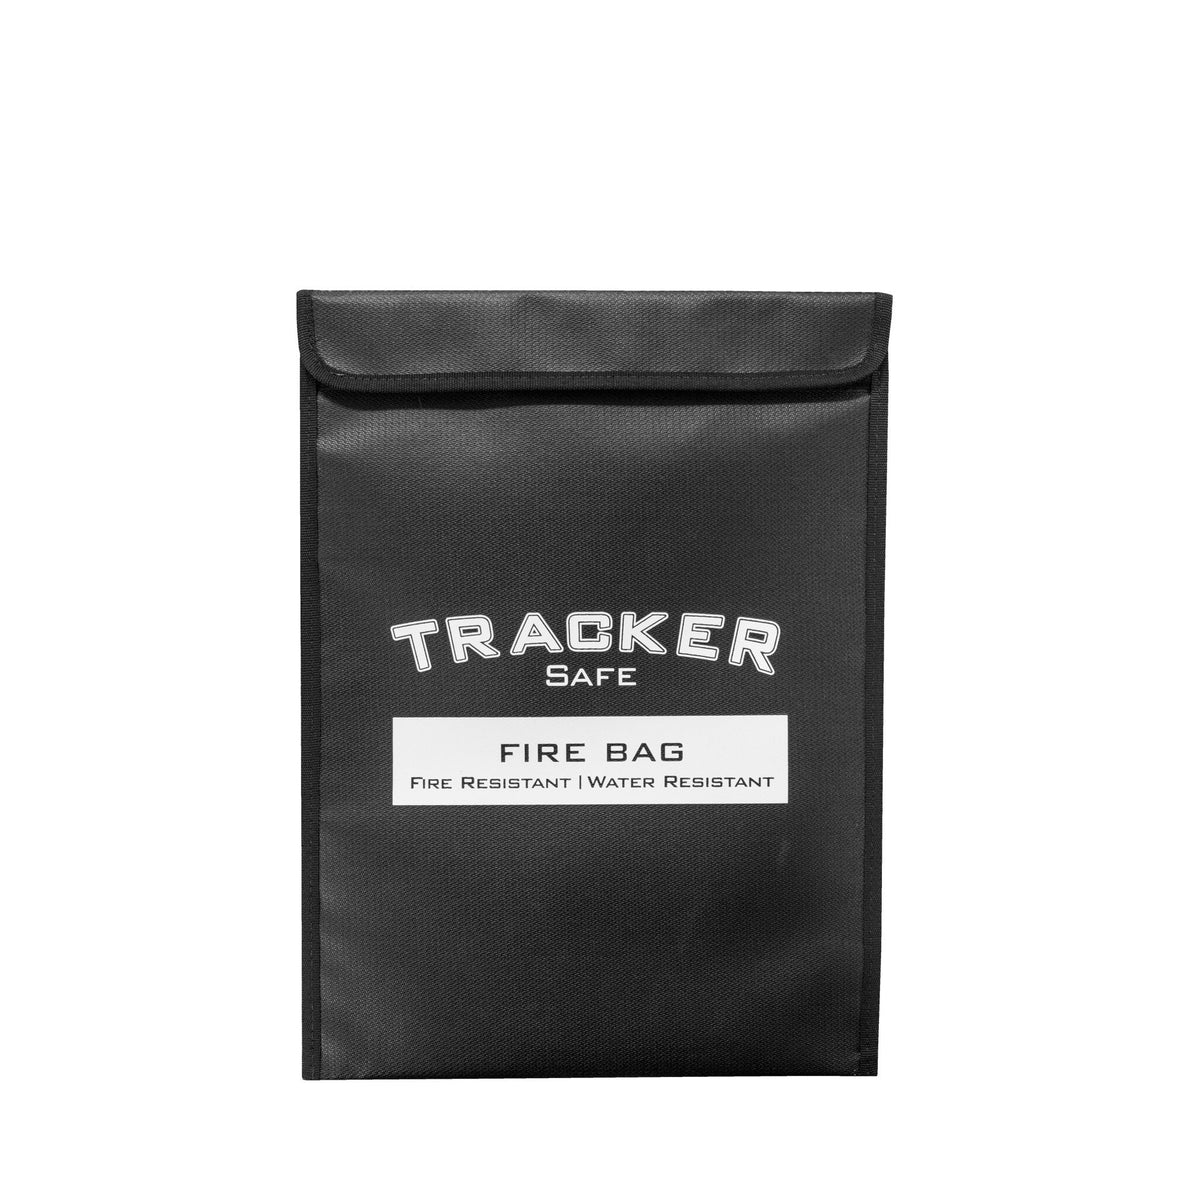 Accessories - Tracker FB1511 Fire &amp; Water Resistant Bag